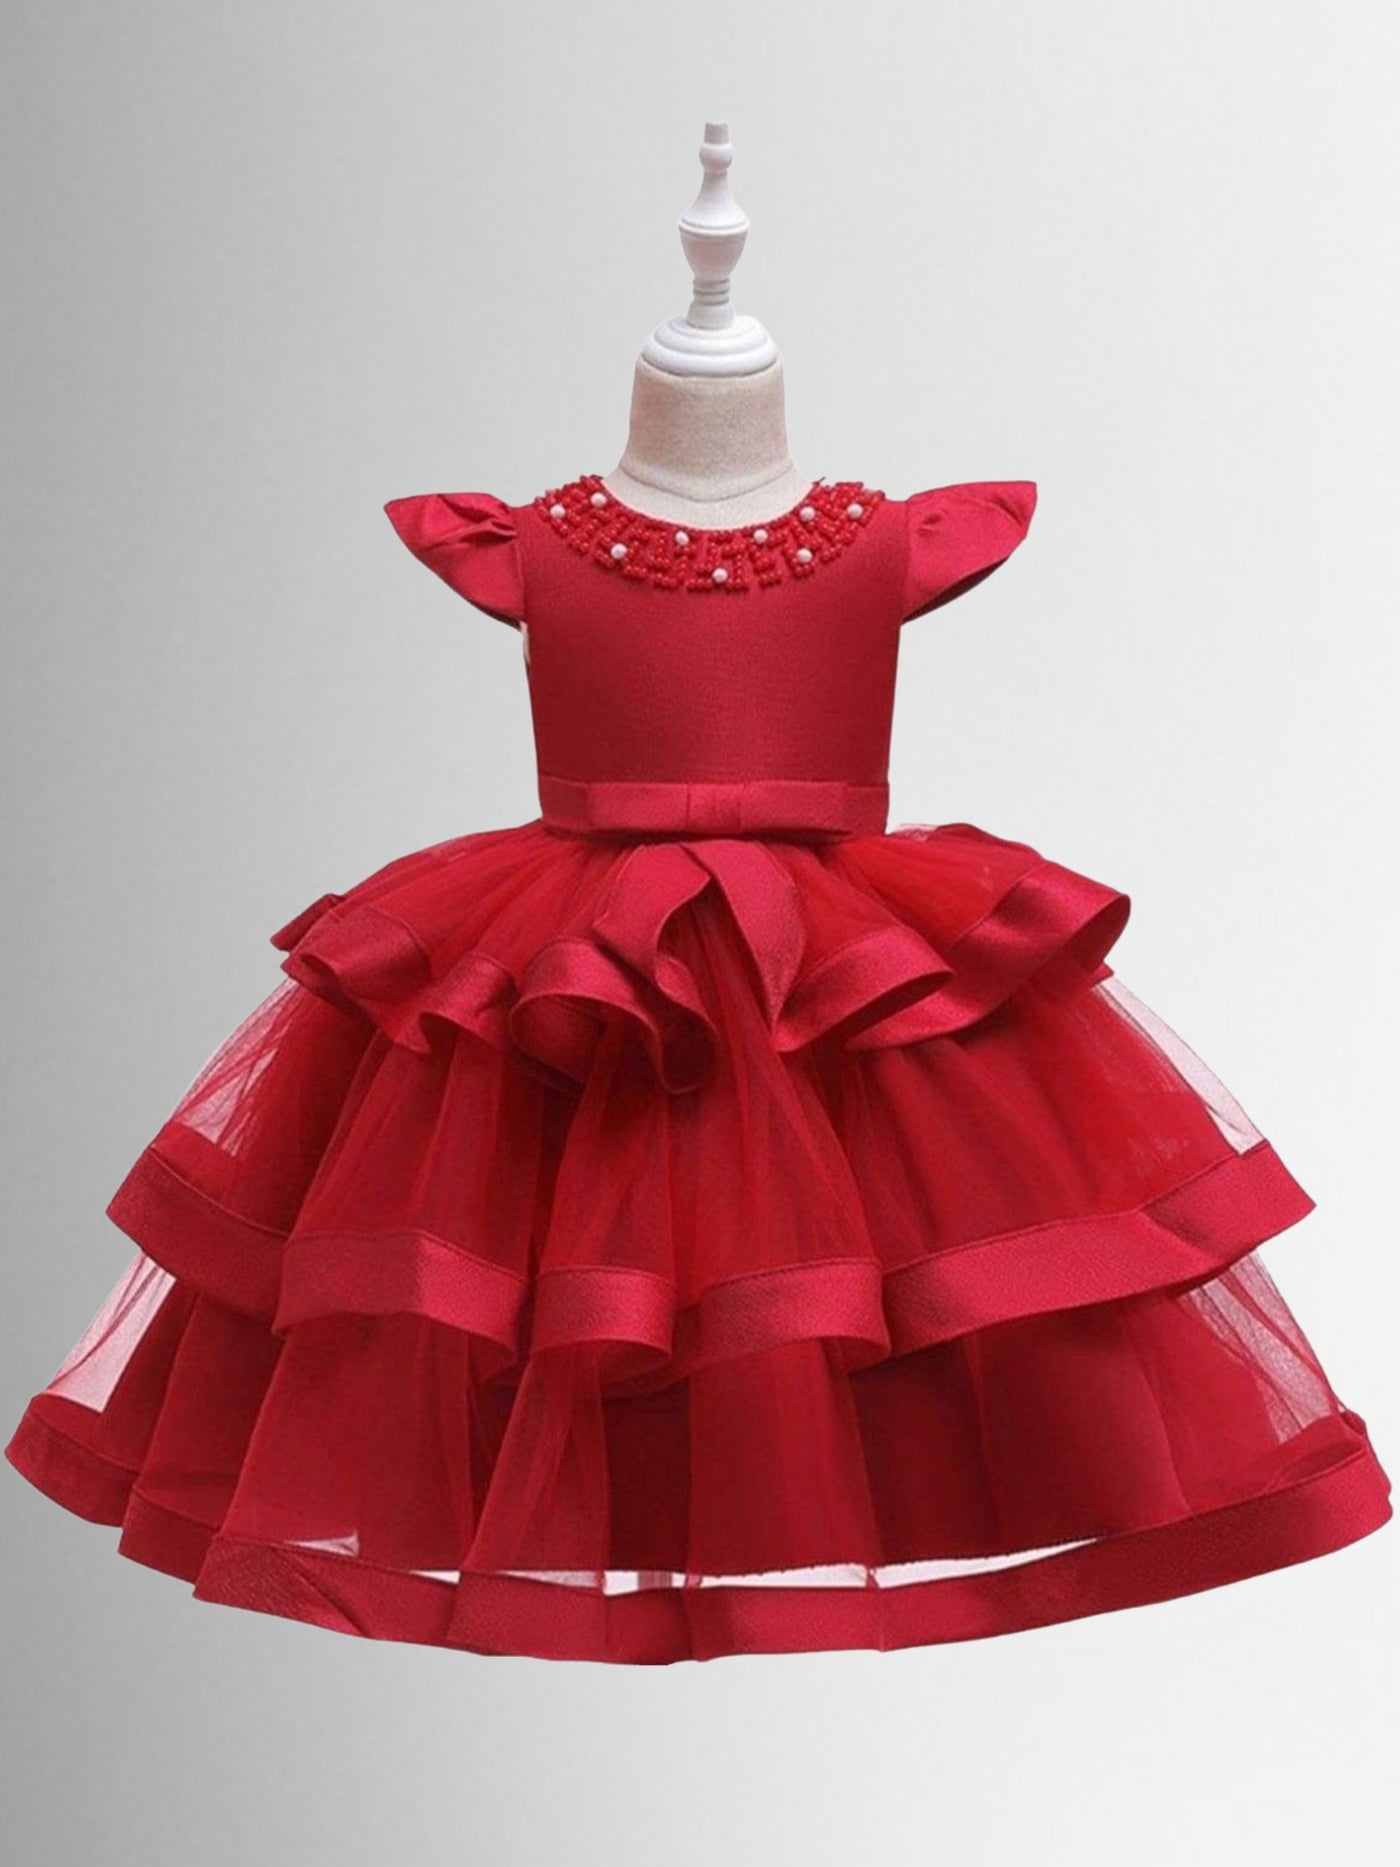 Girls Tiered Ruffle Princess Holiday Dress with Embellished Collar